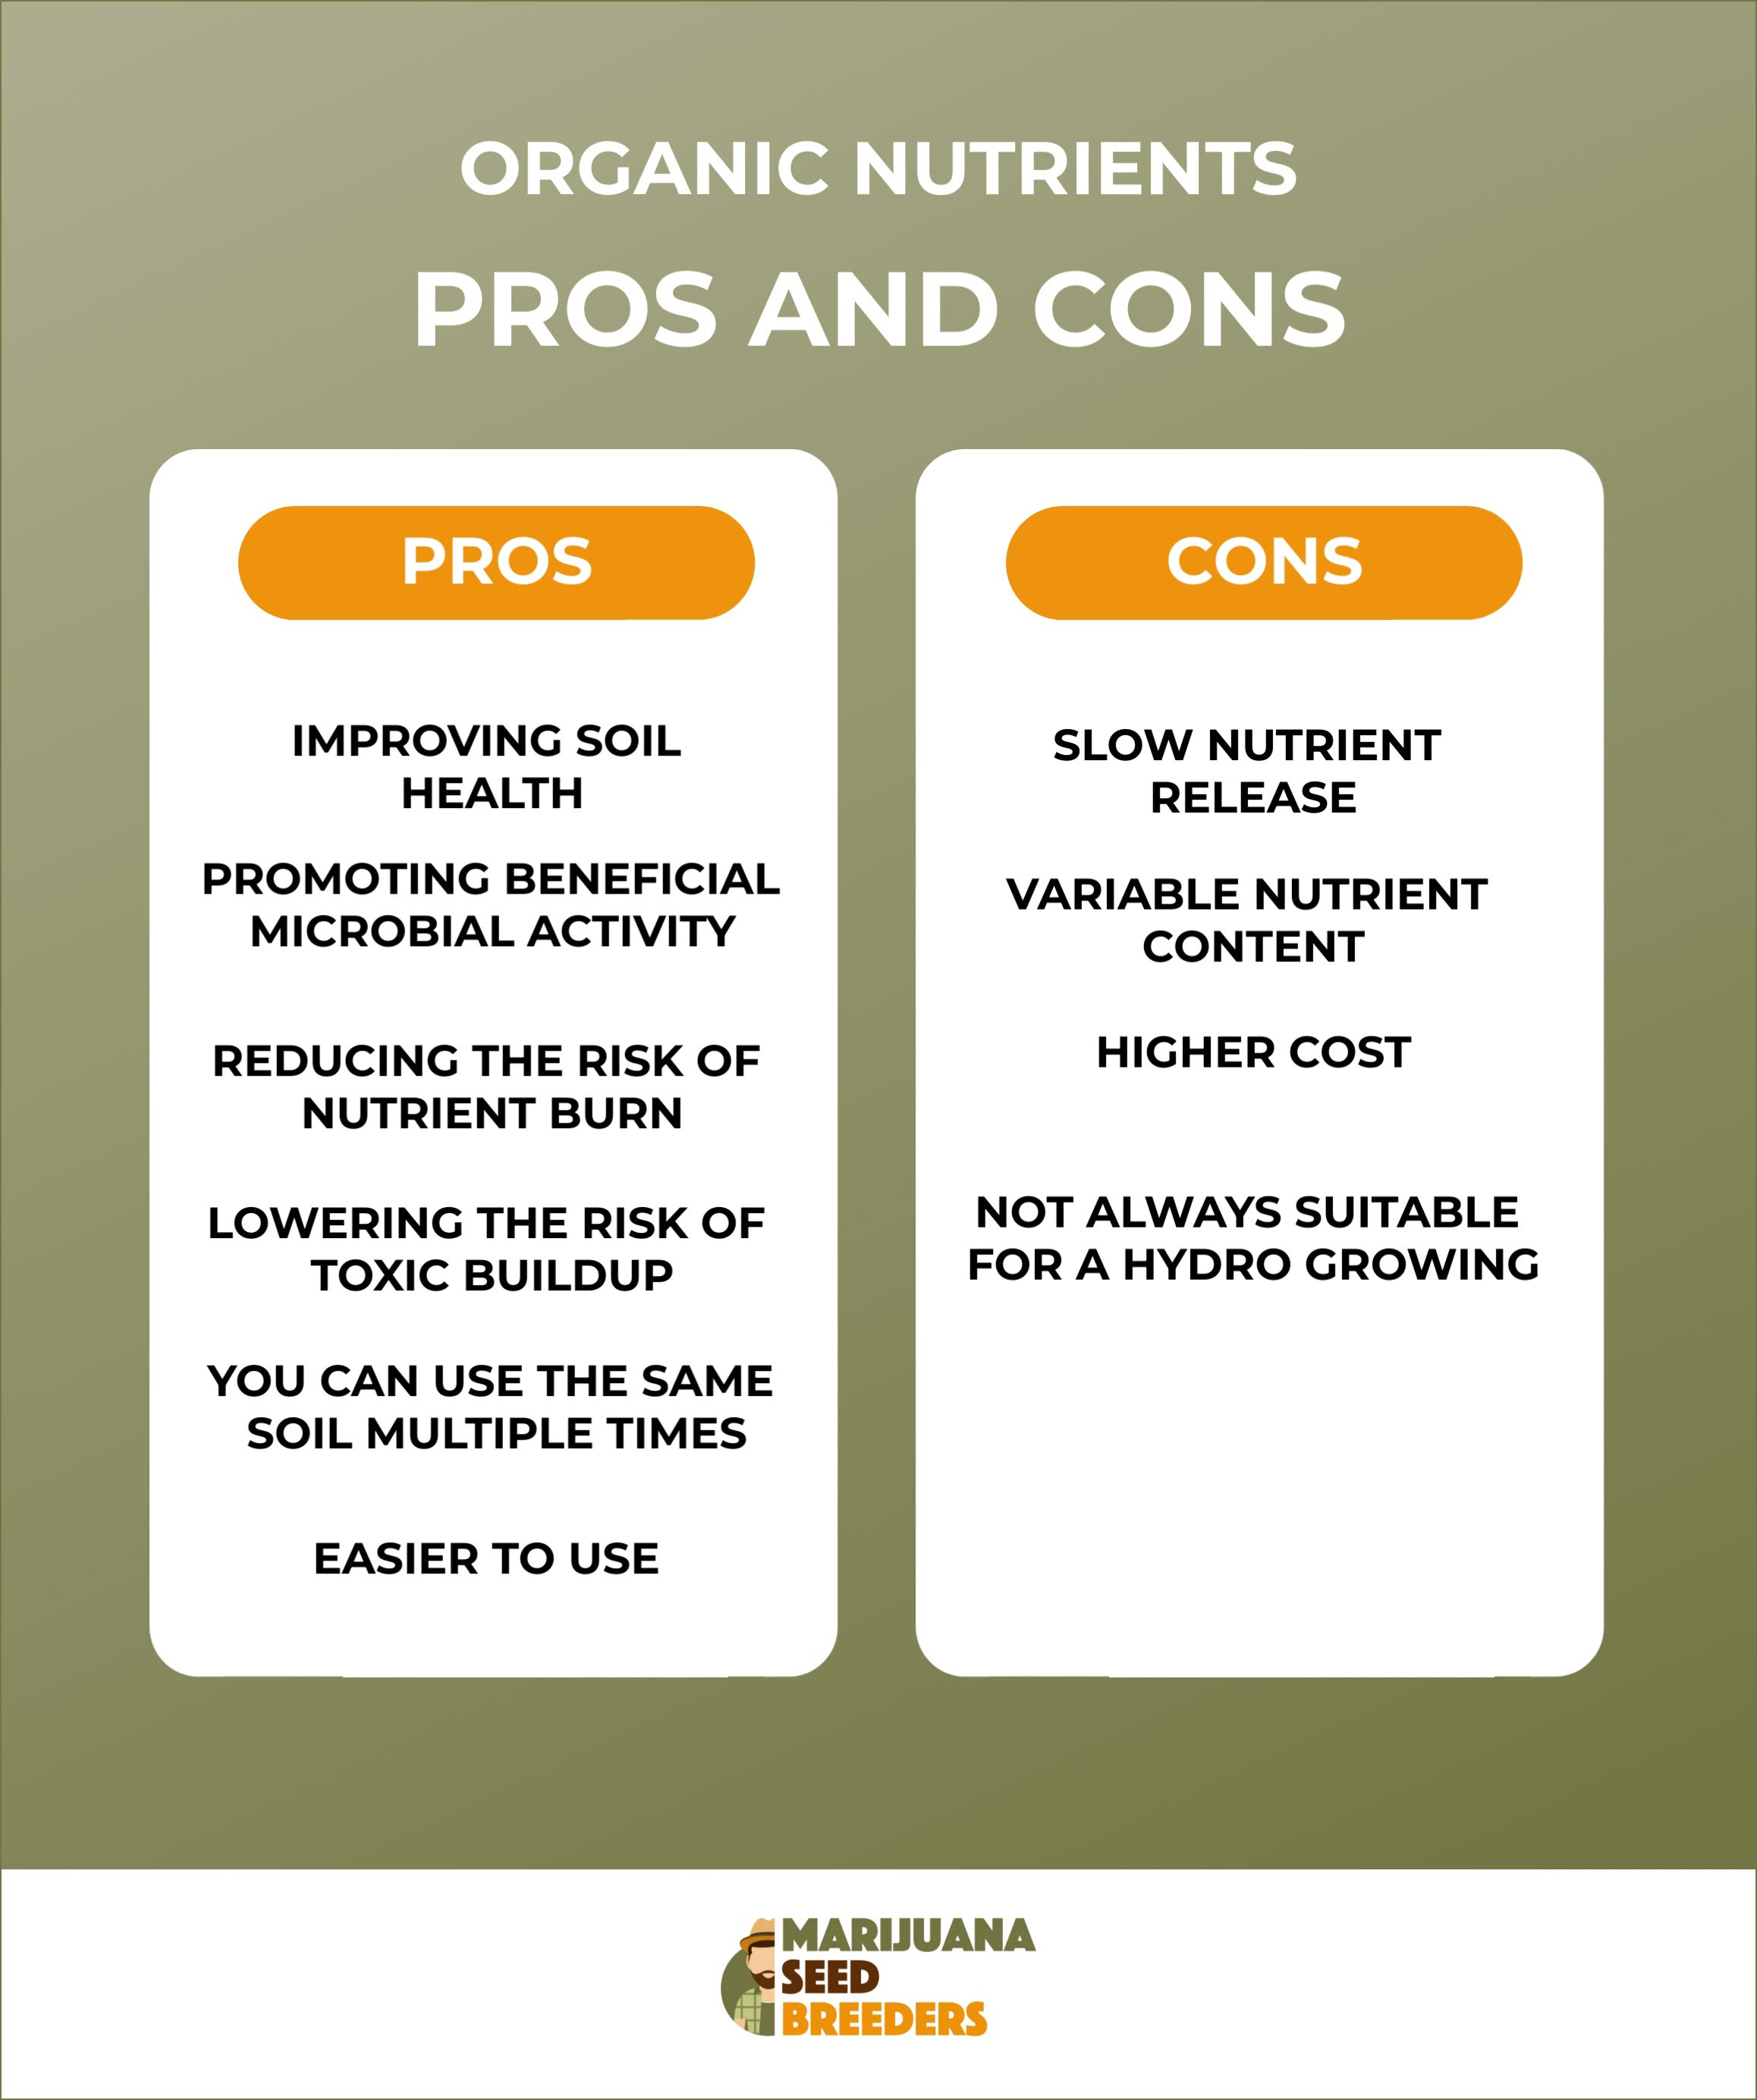 pros and cons for organic nutrients